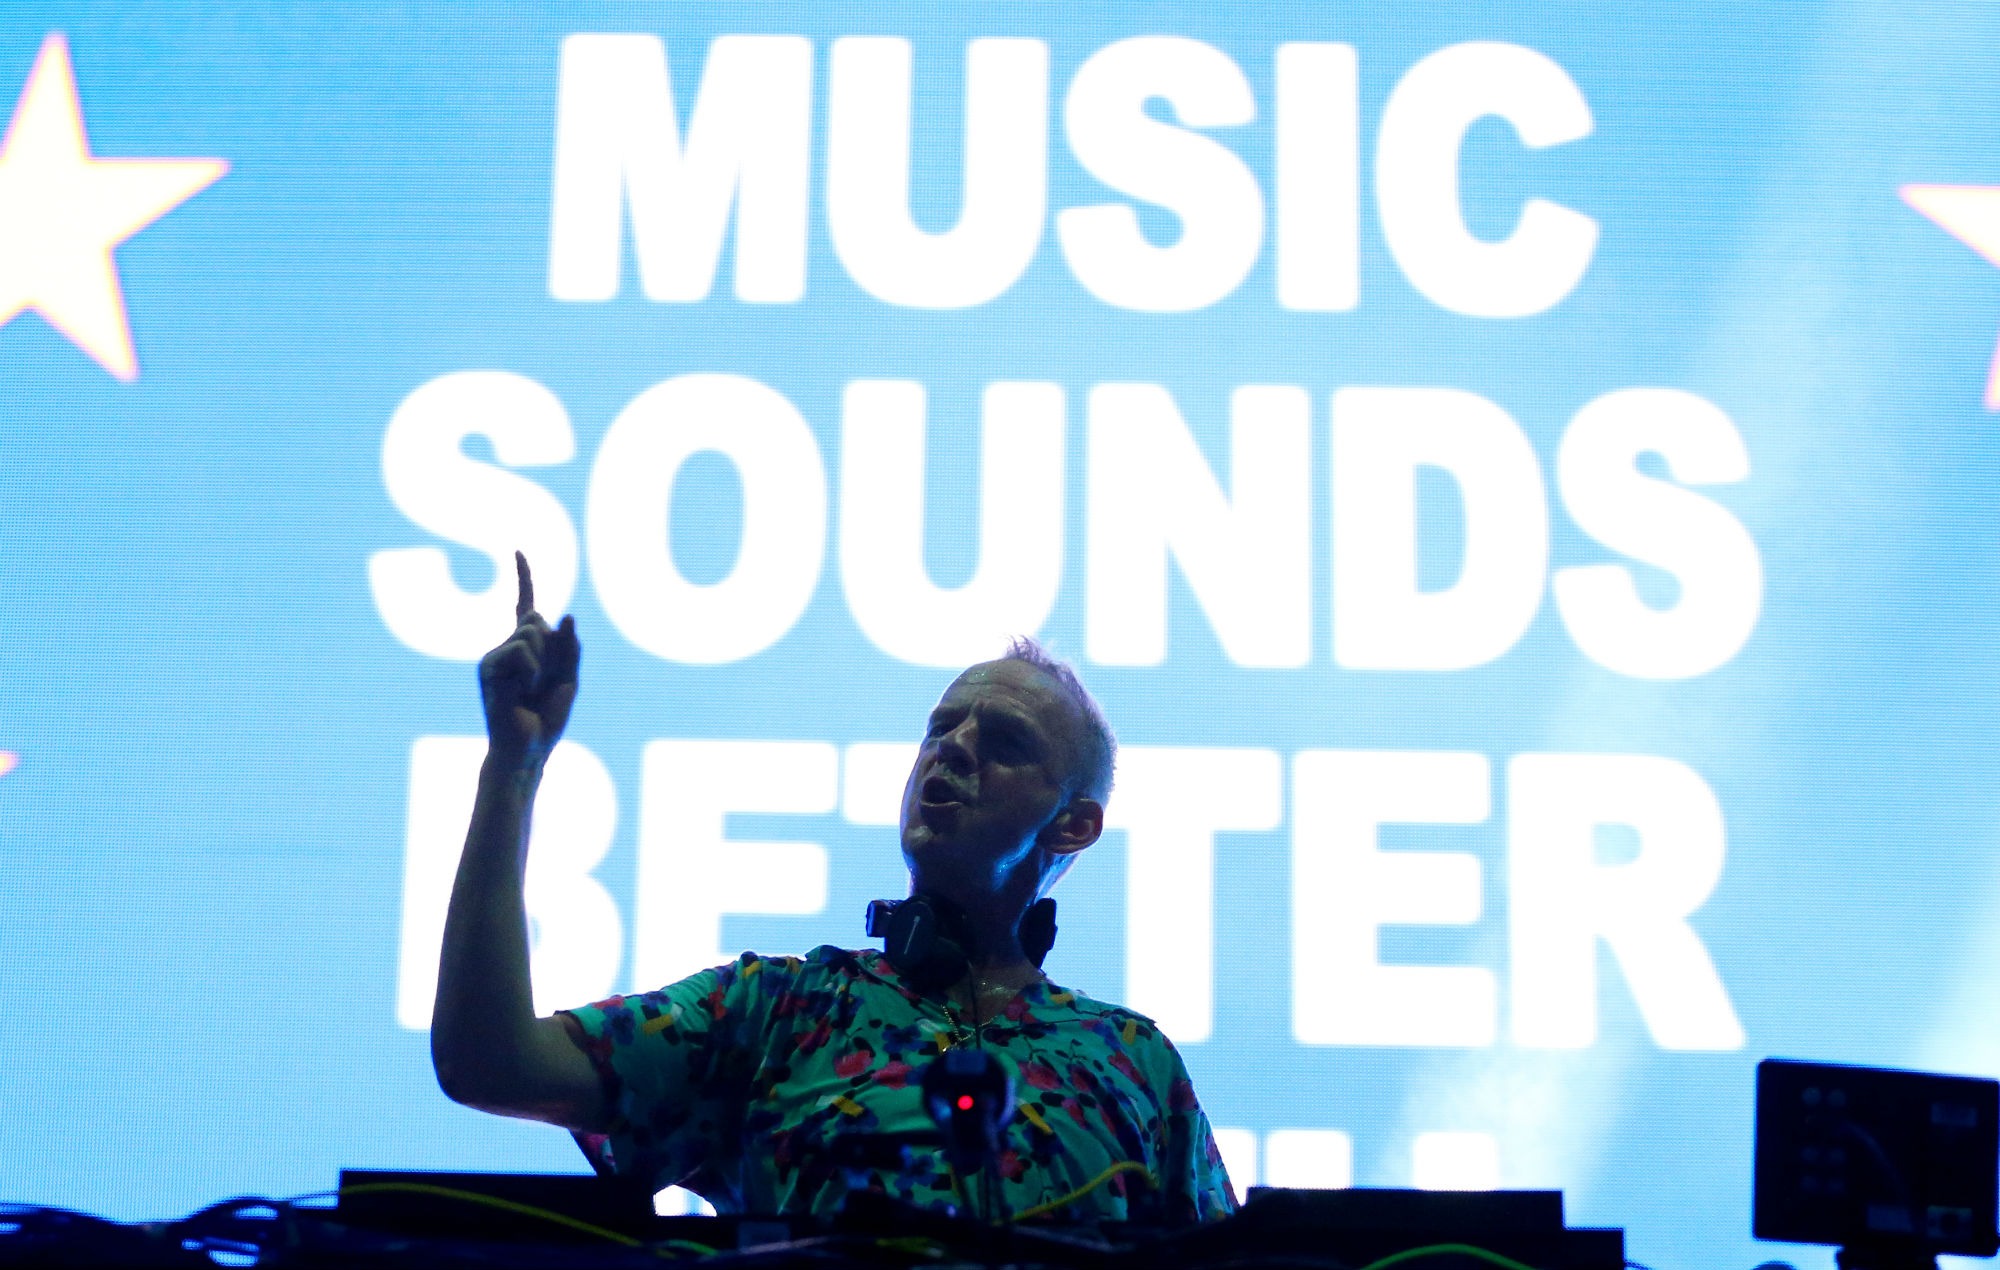 Fatboy Slim on DJing at Liverpool’s COVID club pilot: “It didn’t feel like a dream – it was more of a return to reality”